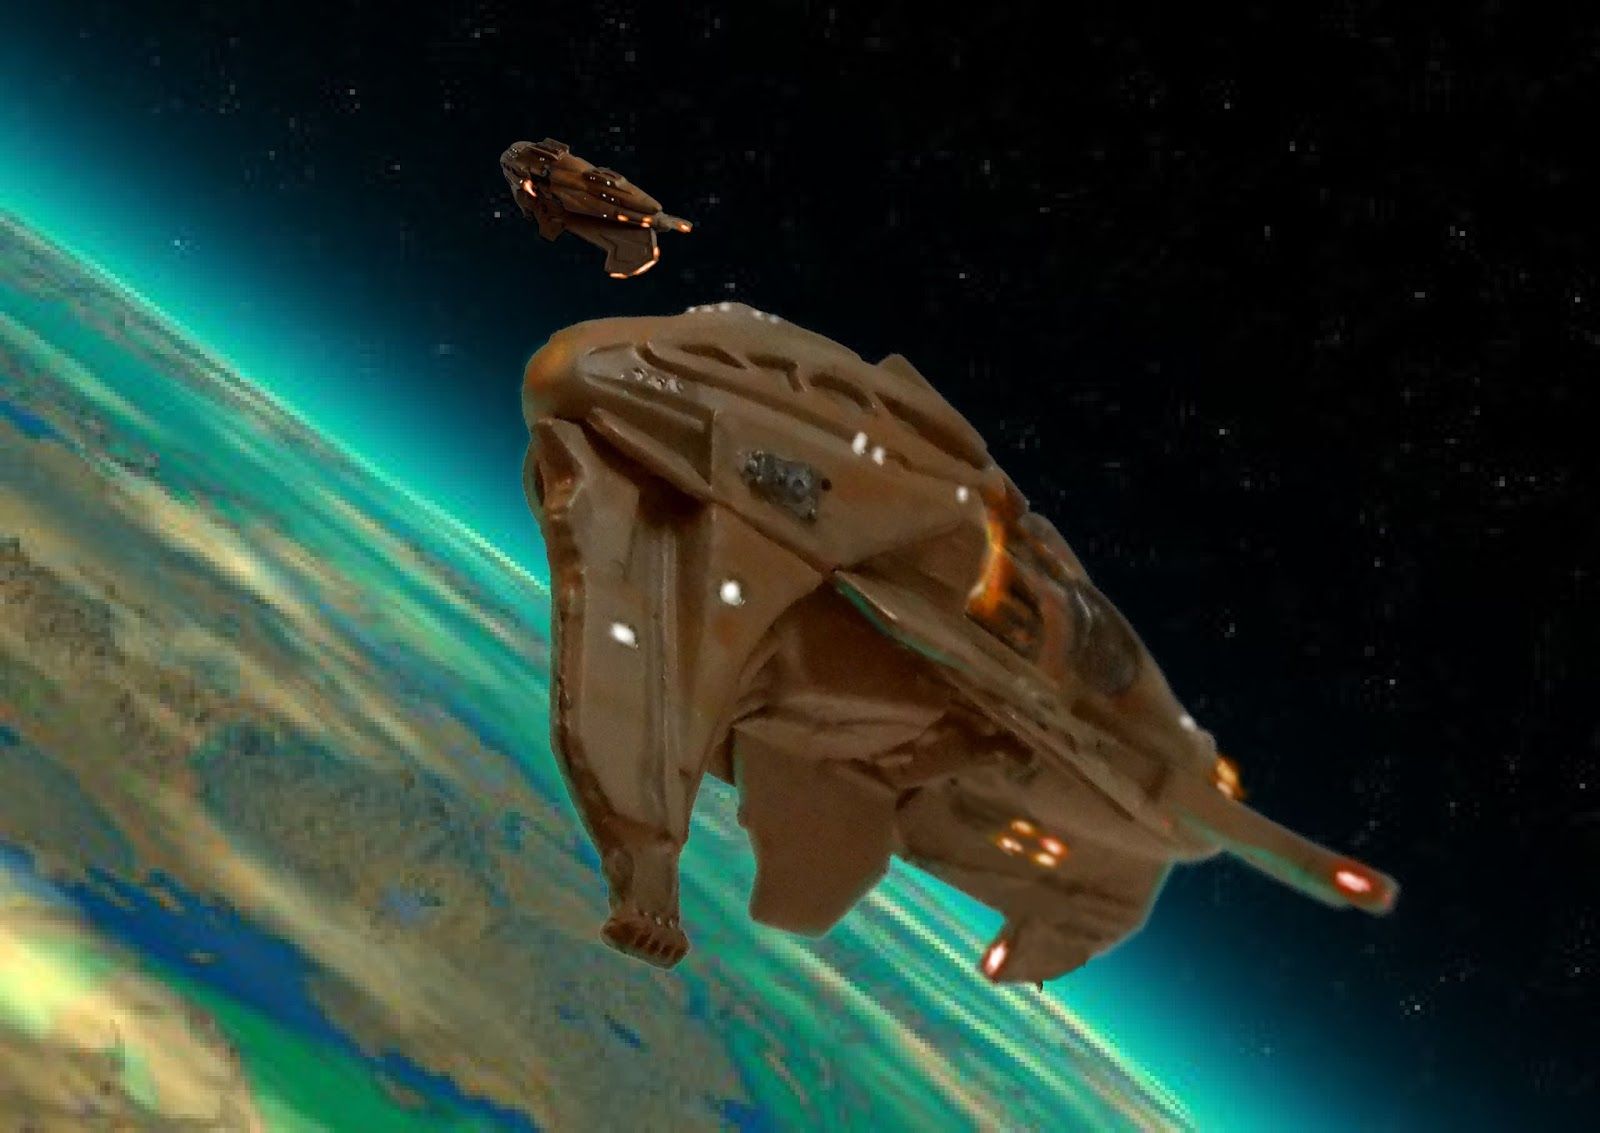 Kazon ship from Voyager